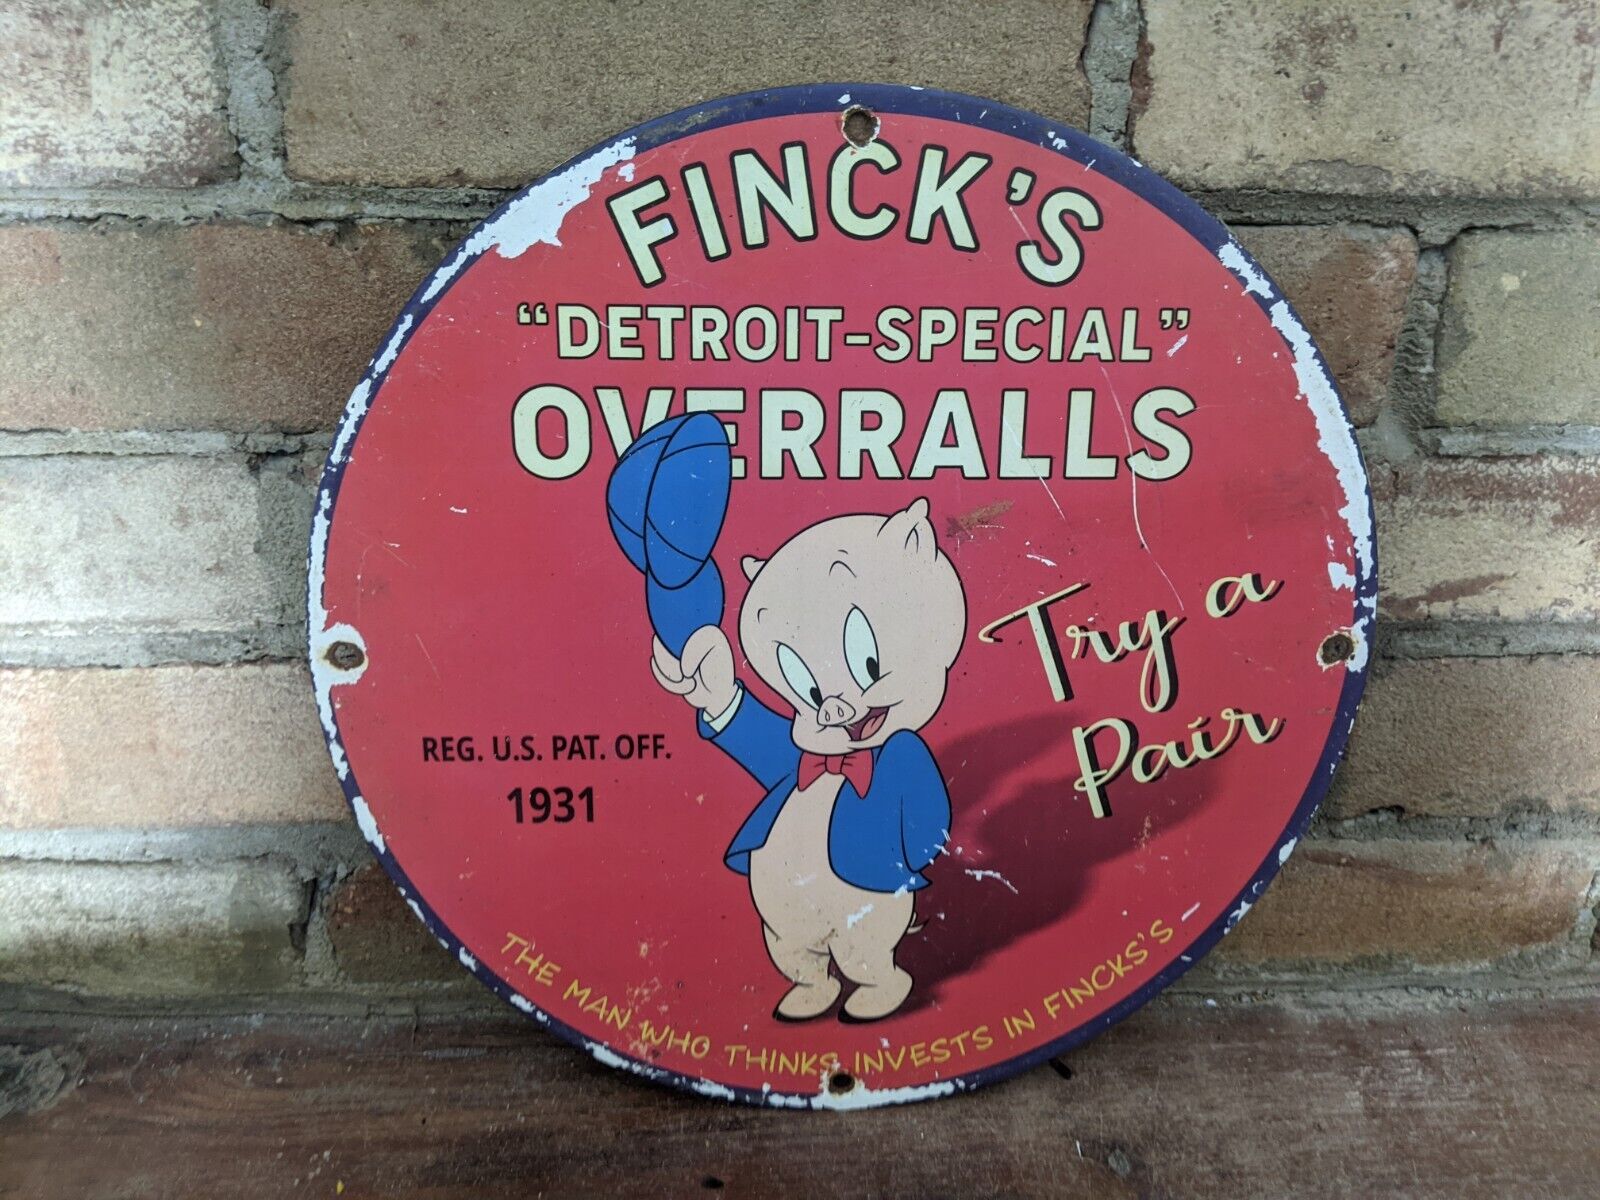 1931 FINCK'S OVERALLS PORCELAIN CLOTHING ADVERTISING SIGN DETROIT-SPECIAL 12